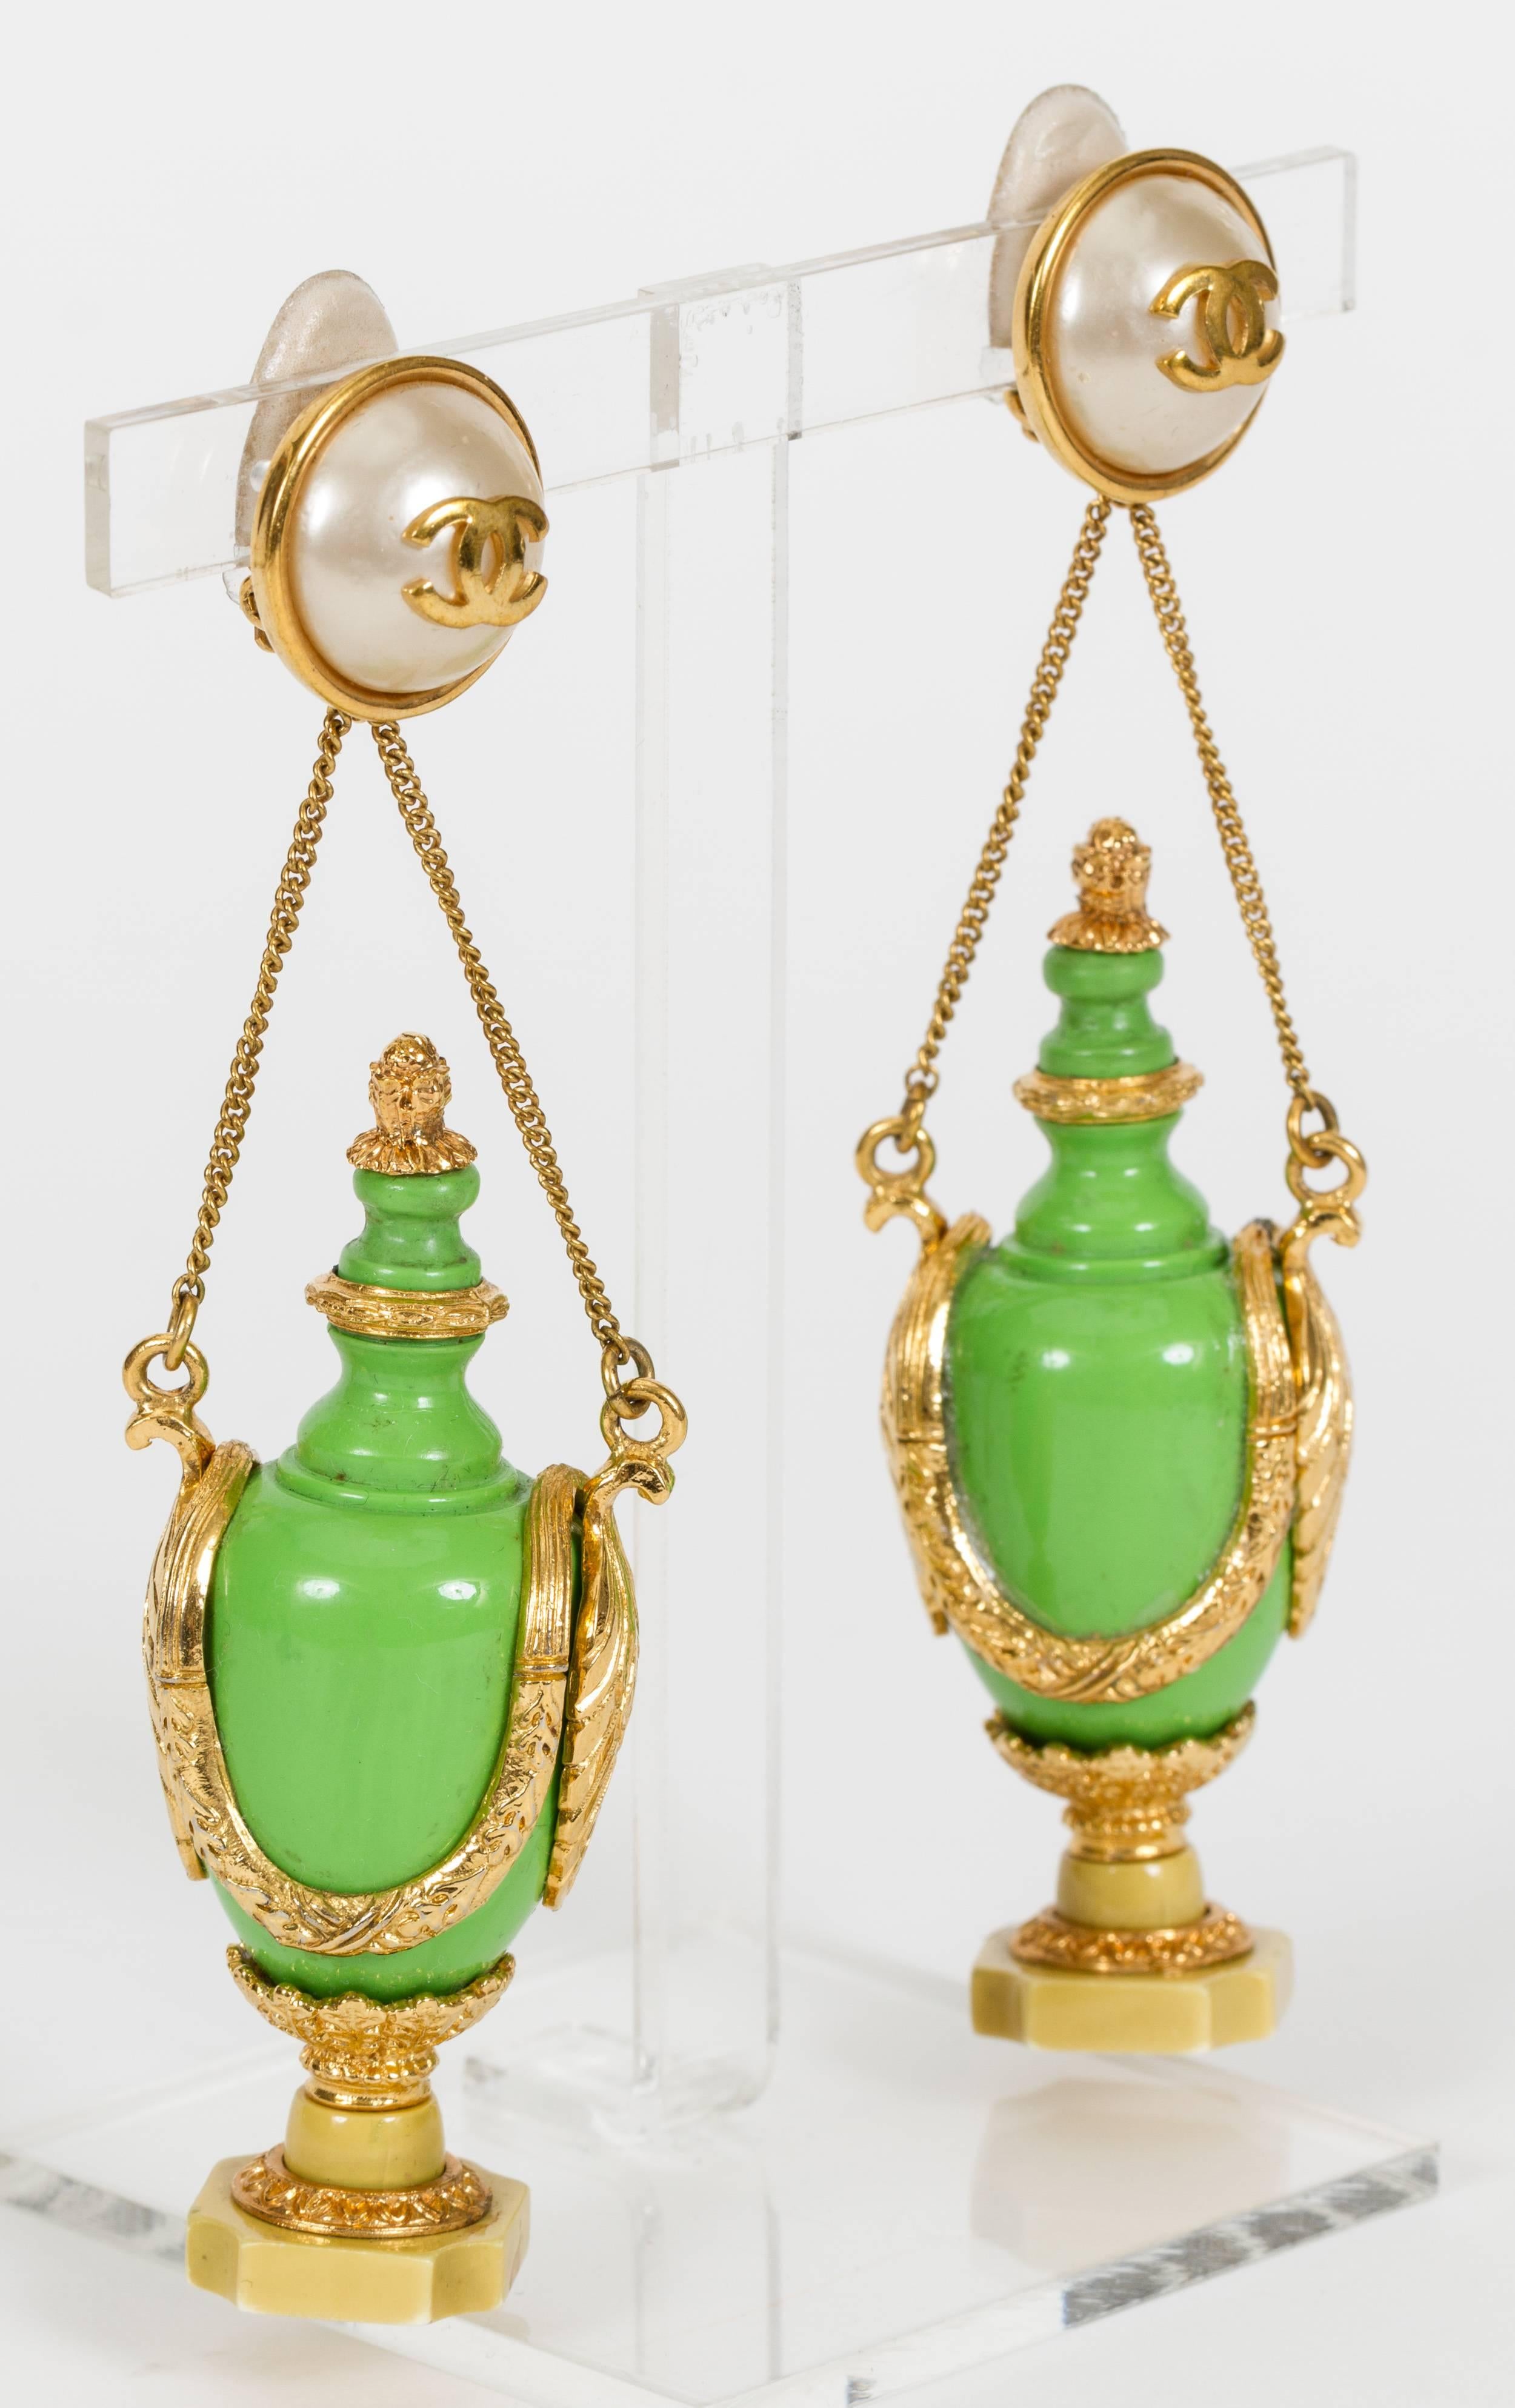 Chanel one of a kind collectible dangling bottle earrings. Collection 28 by Victoire de Castellaine. Excellent condition. Comes with original box.